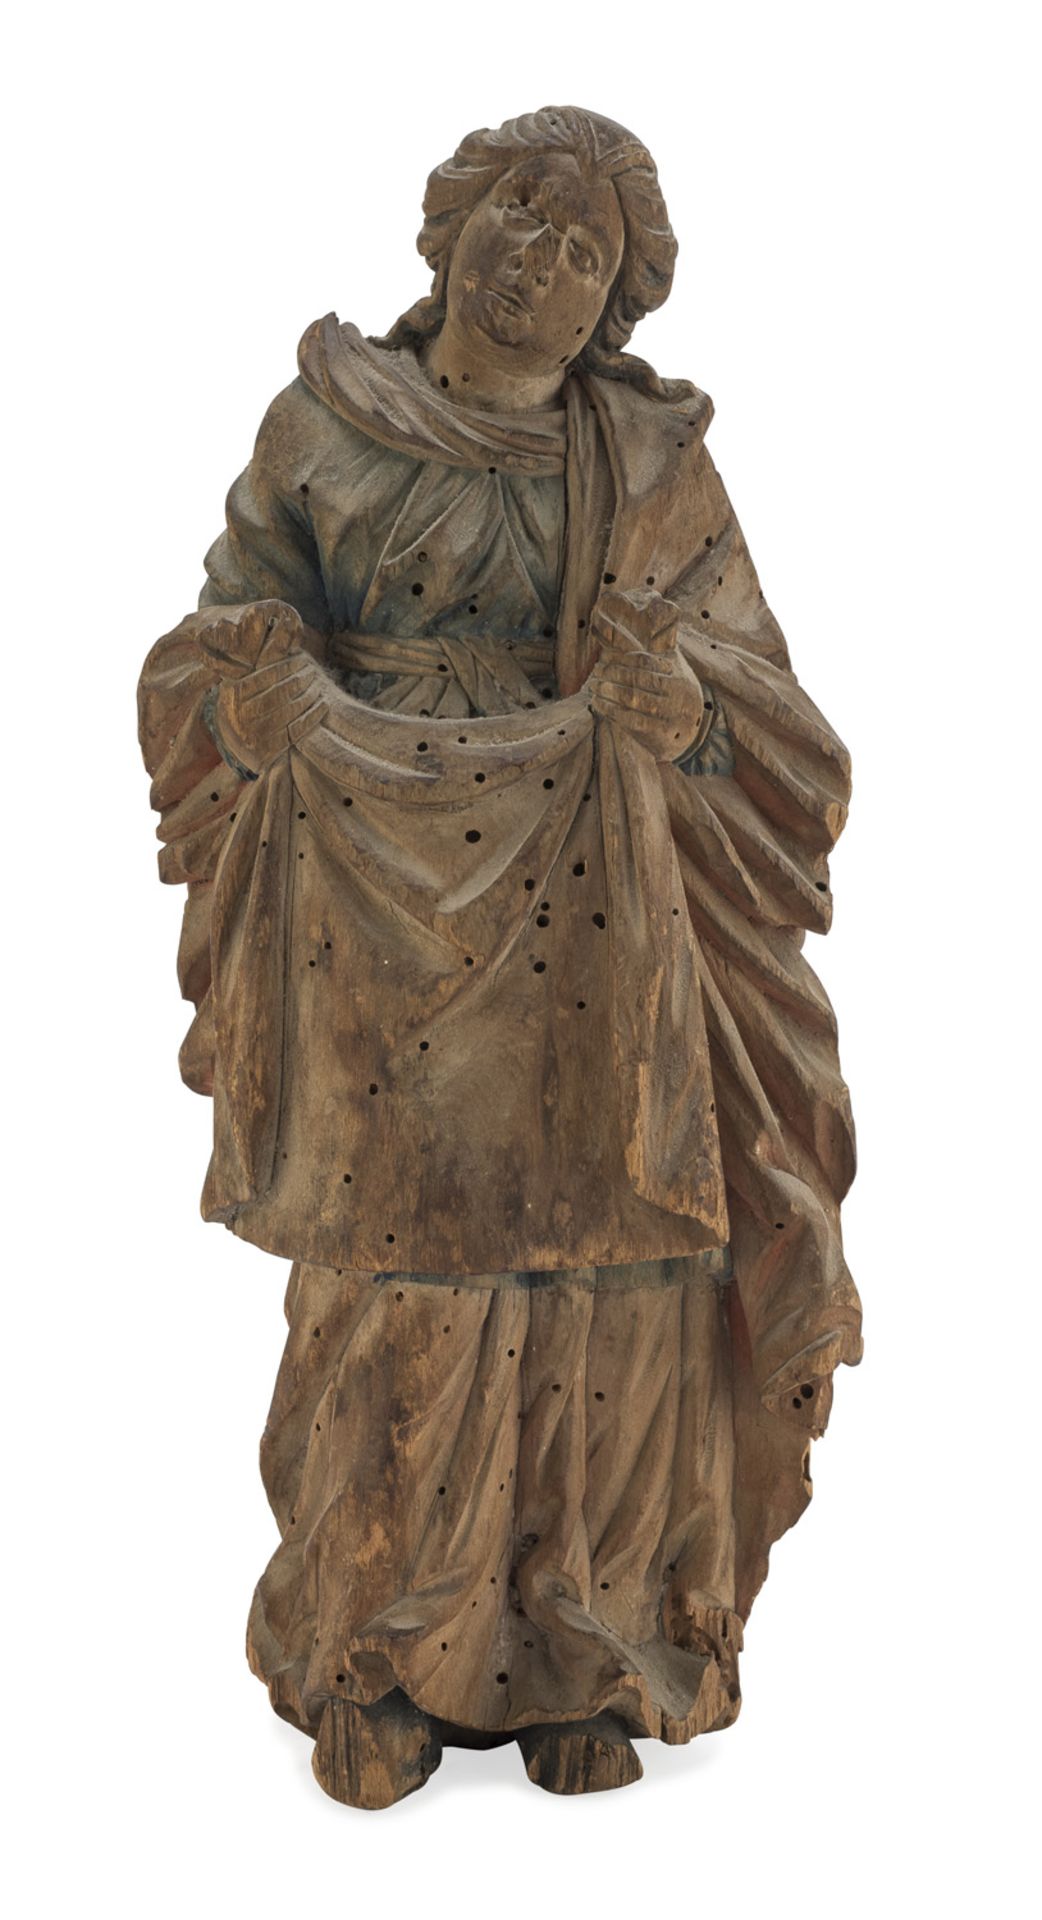 SCULPTURE OF VERONICA CENTRAL ITALY 18th CENTURY